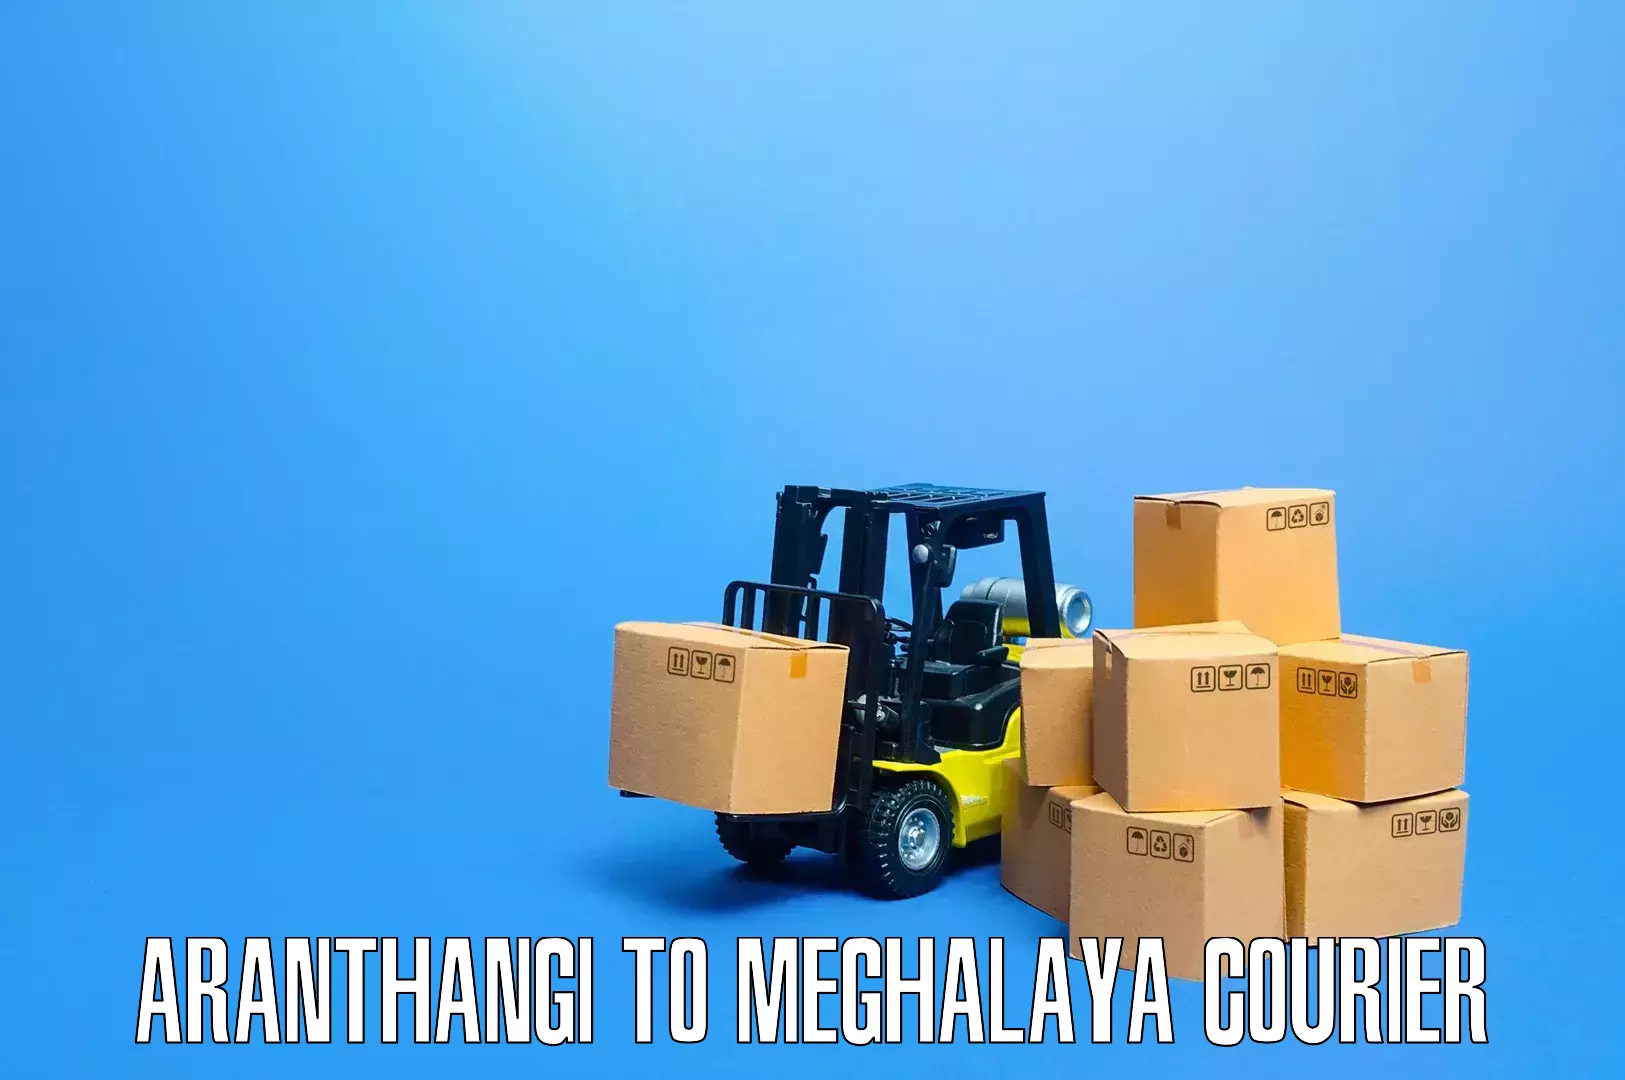 Comprehensive moving assistance Aranthangi to Dkhiah West